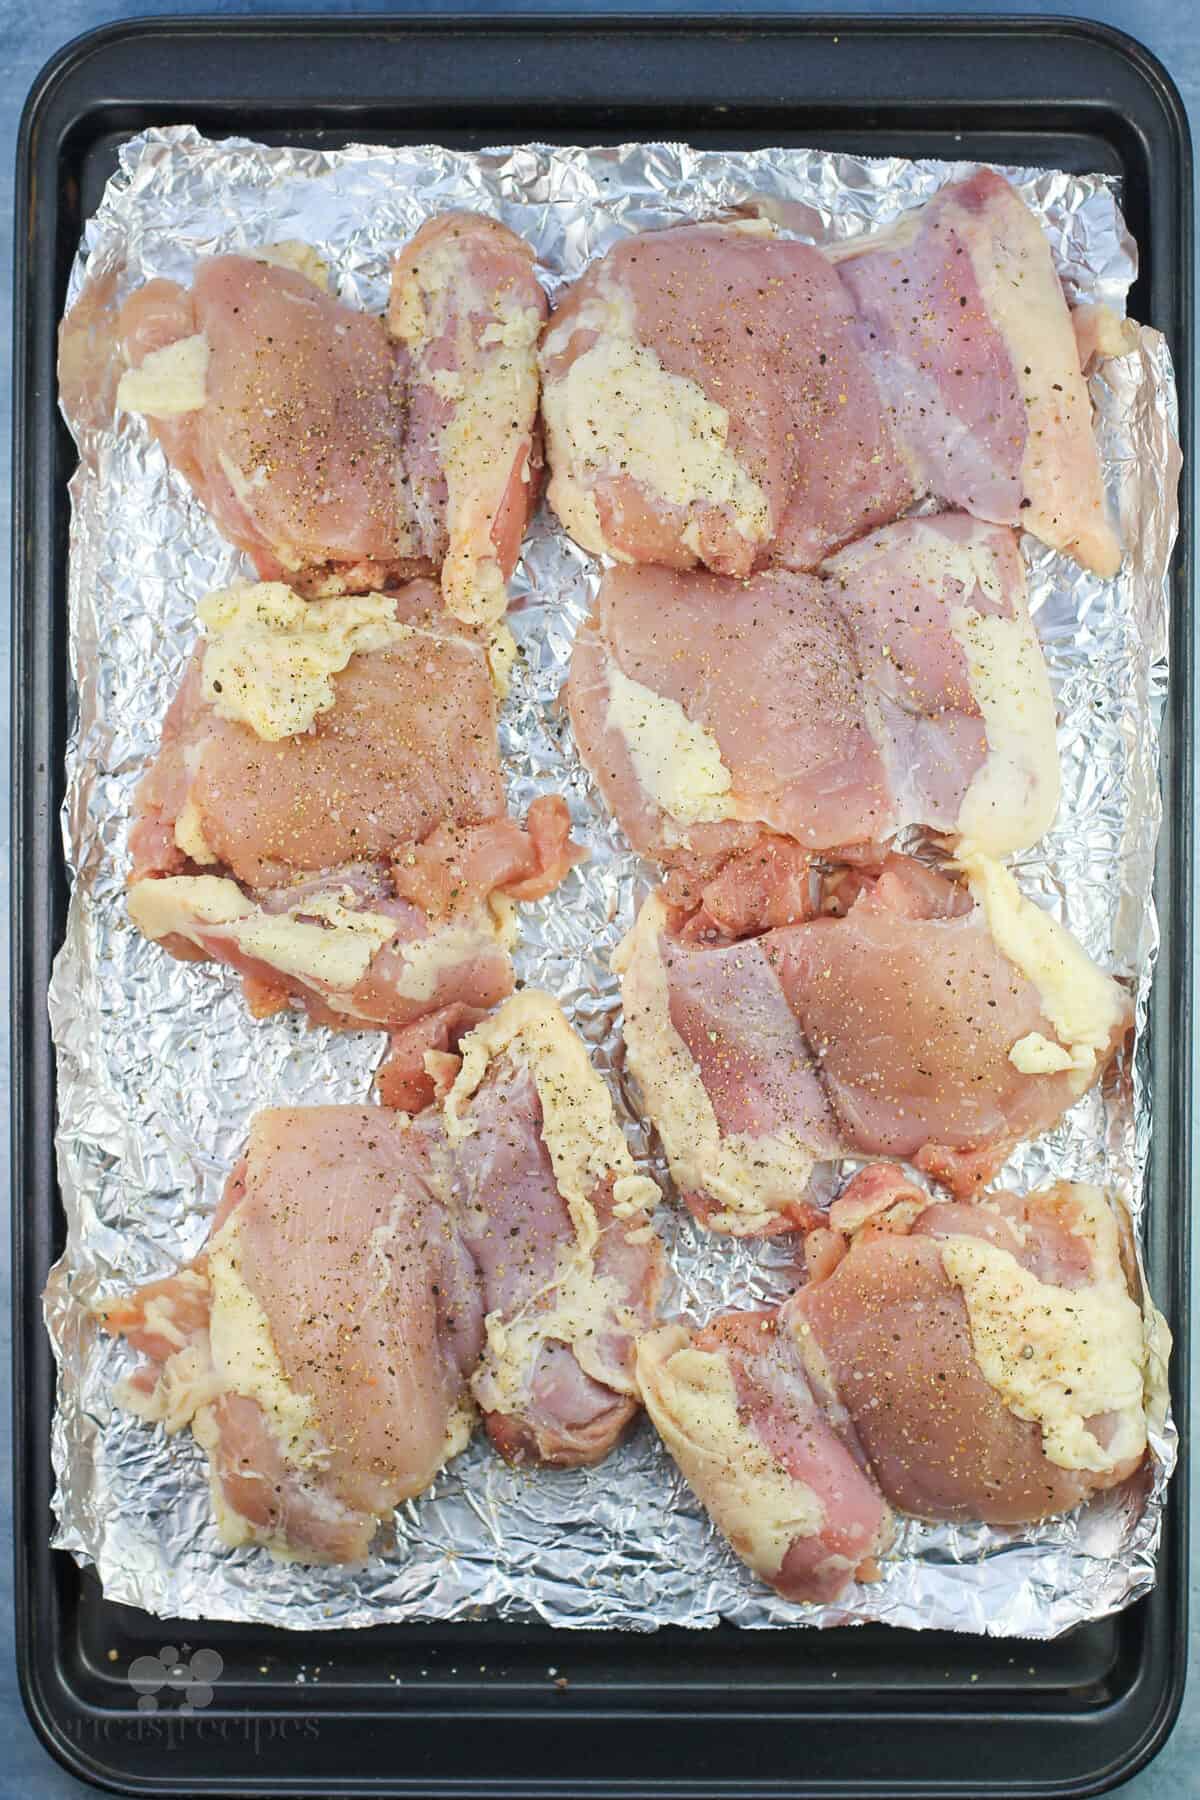 uncooked chicken thighs on bake sheet